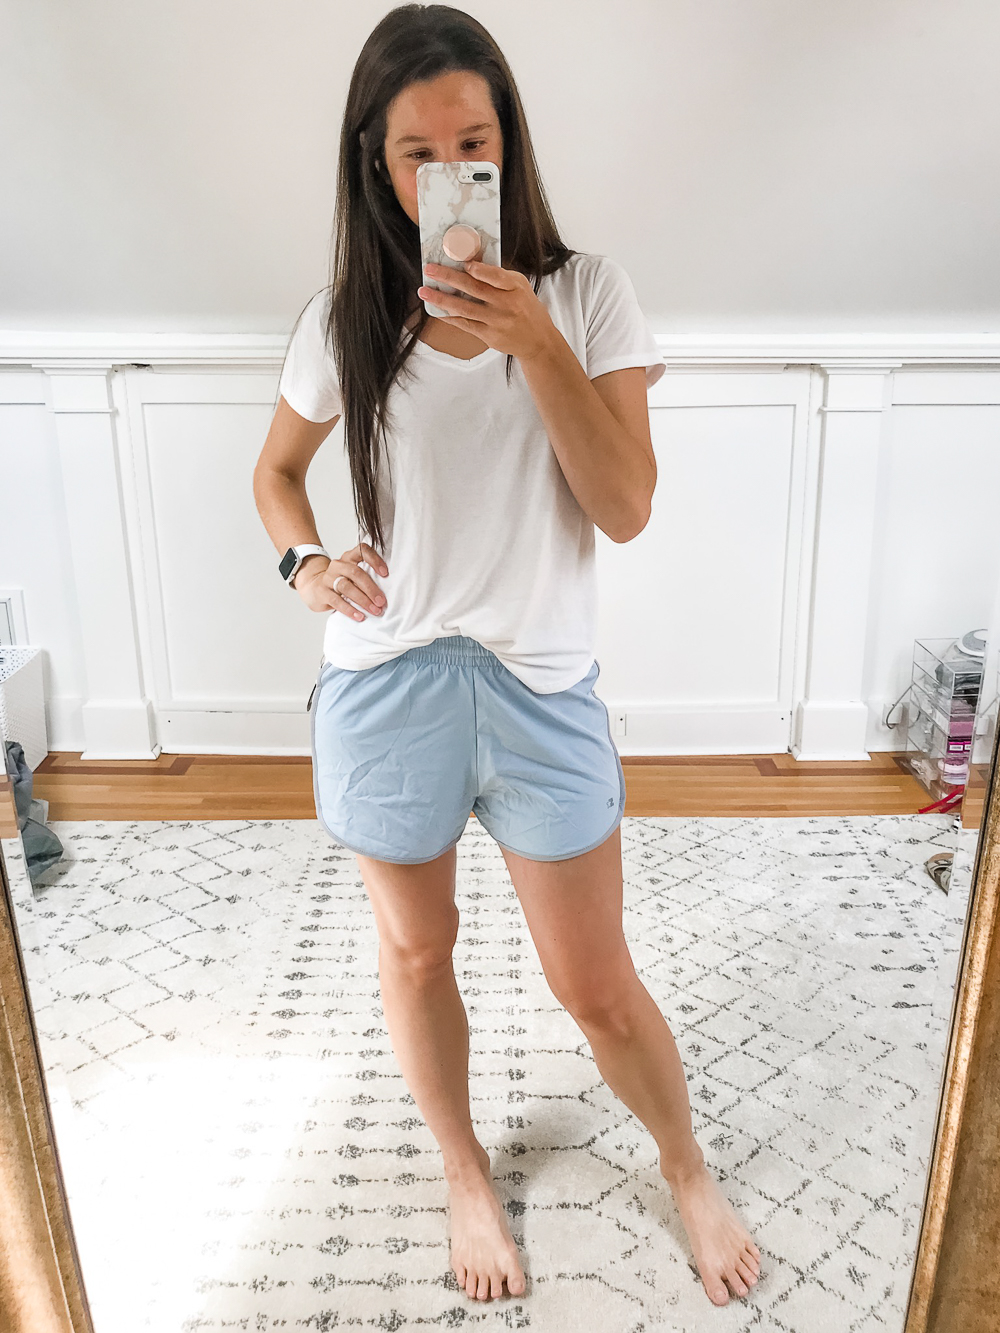 Amazon Starter Stretch Running Shorts in Dusty Blue, Amazon Prime Day Try-On Haul: Top Affordable Fashion Finds